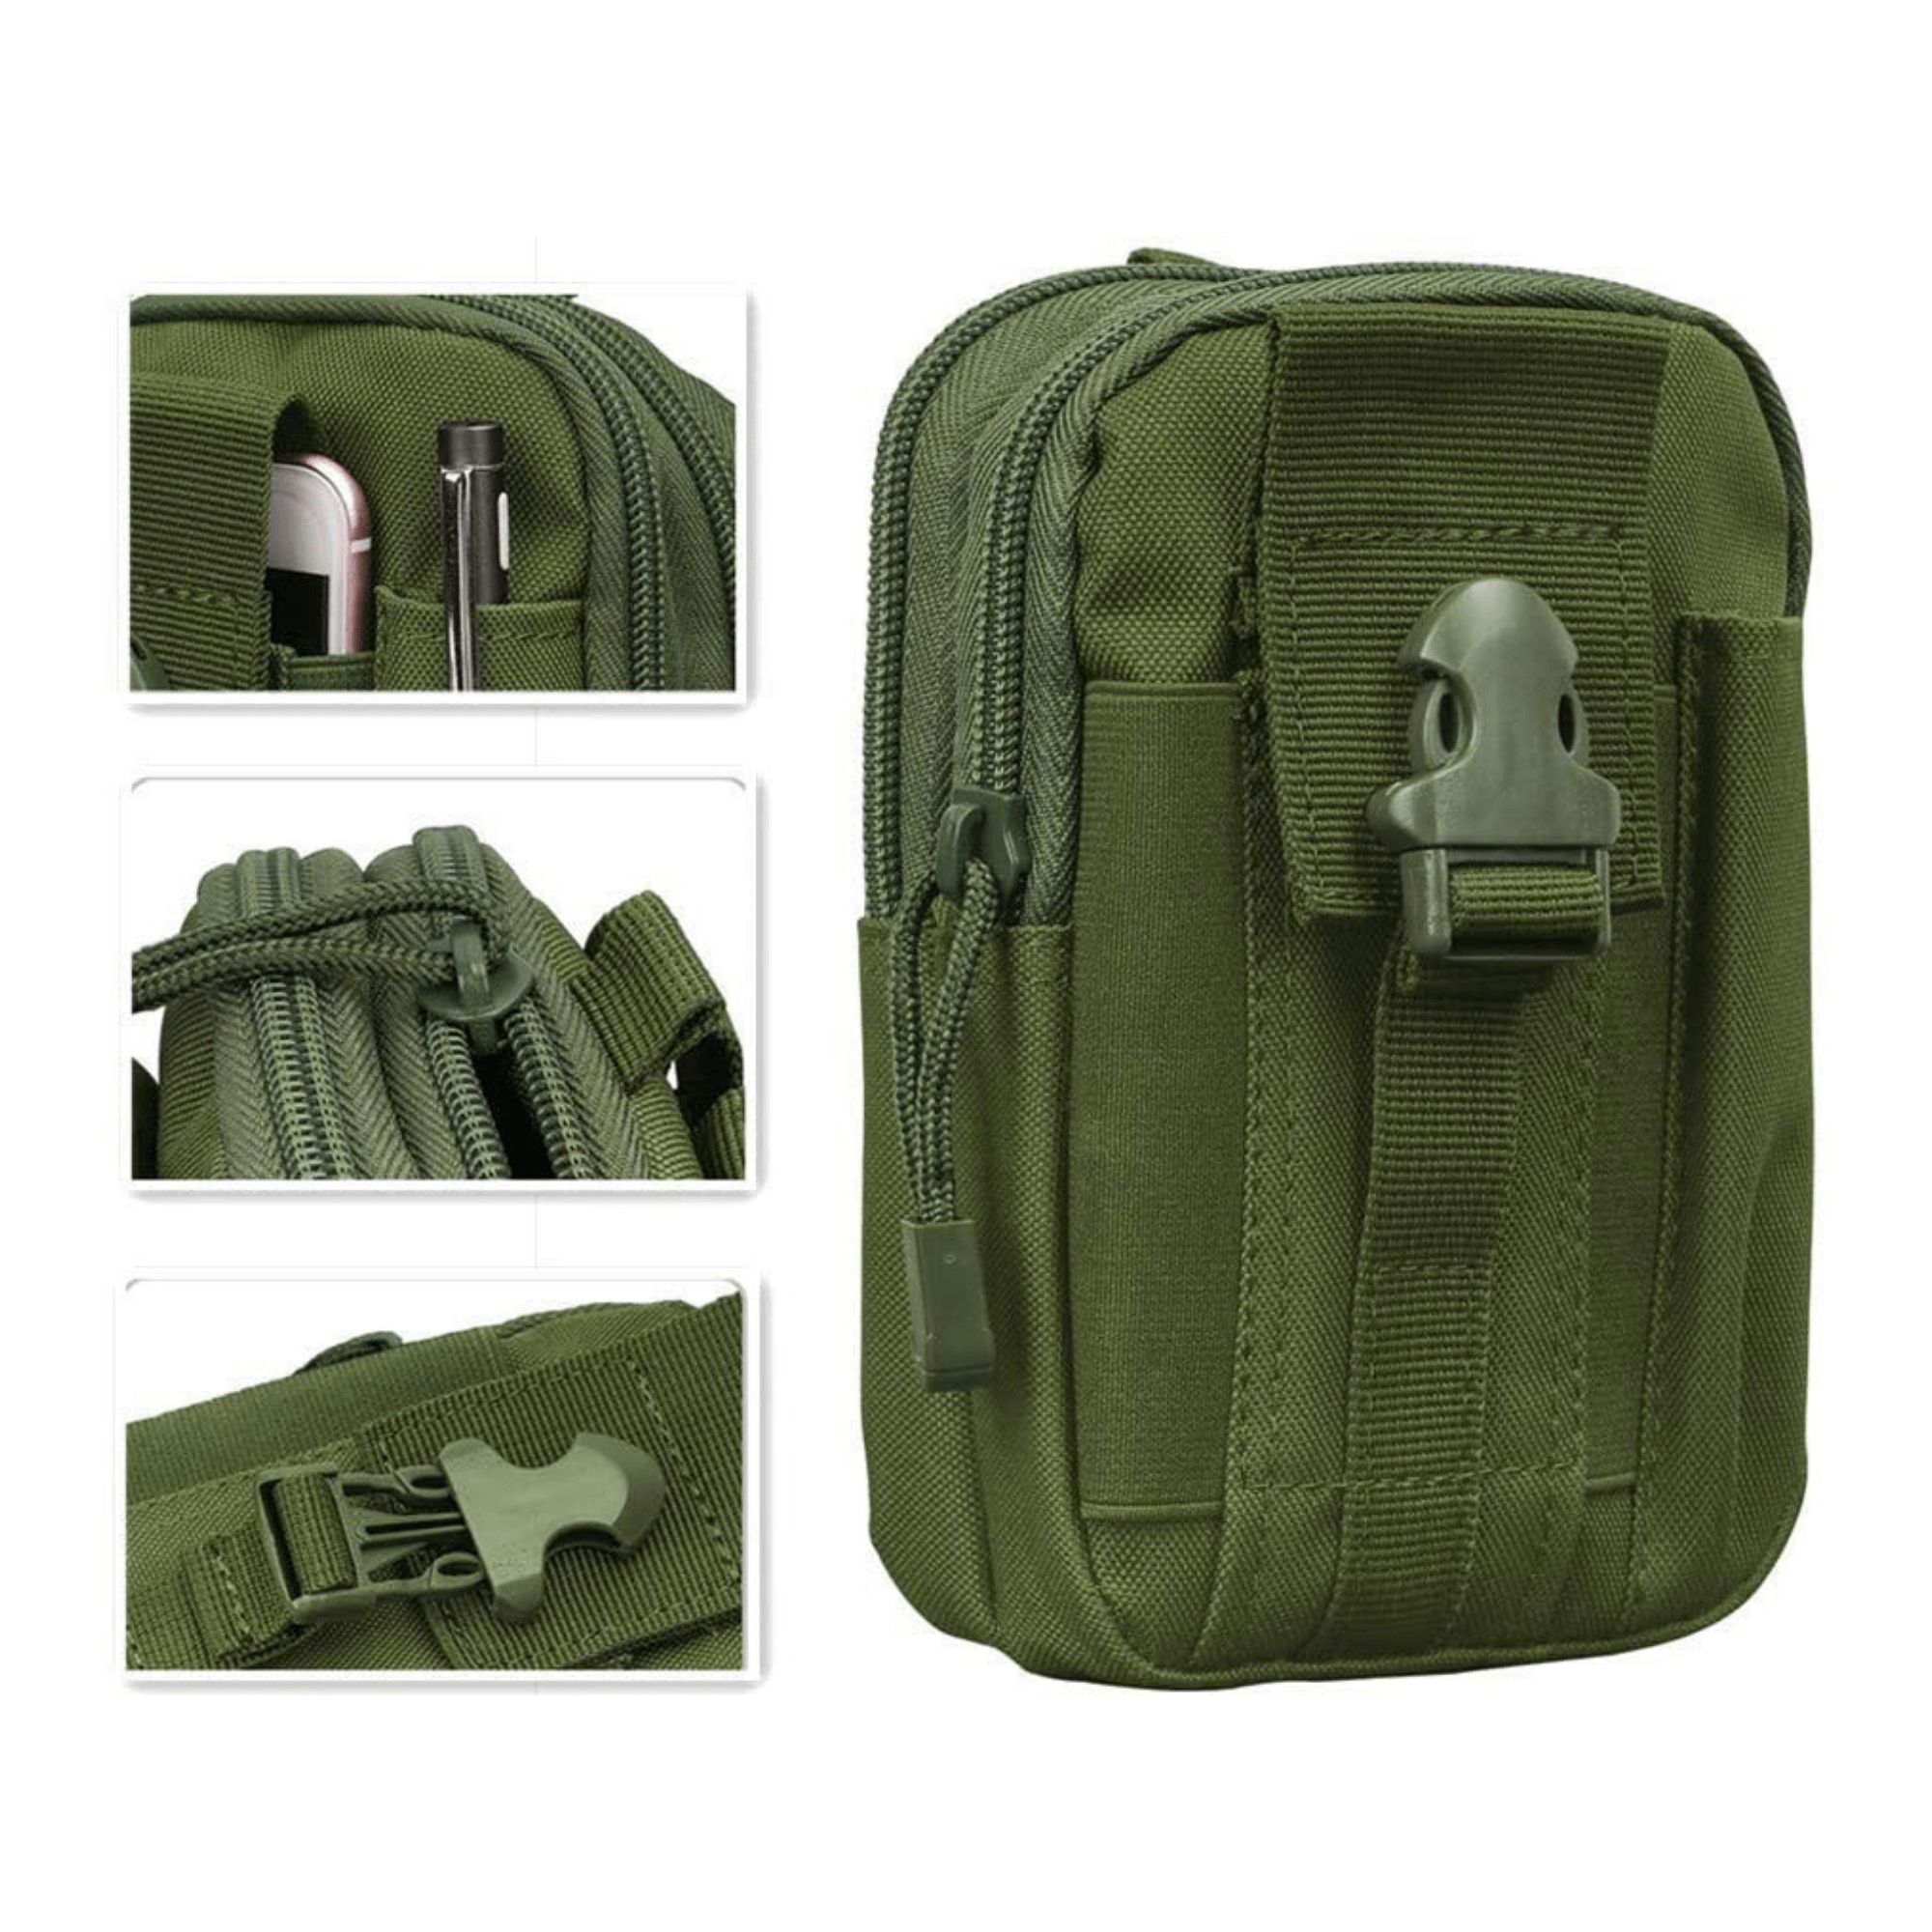 Tactical MOLLE Pouch & Waist Bag for Hiking & Outdoor Activities-6